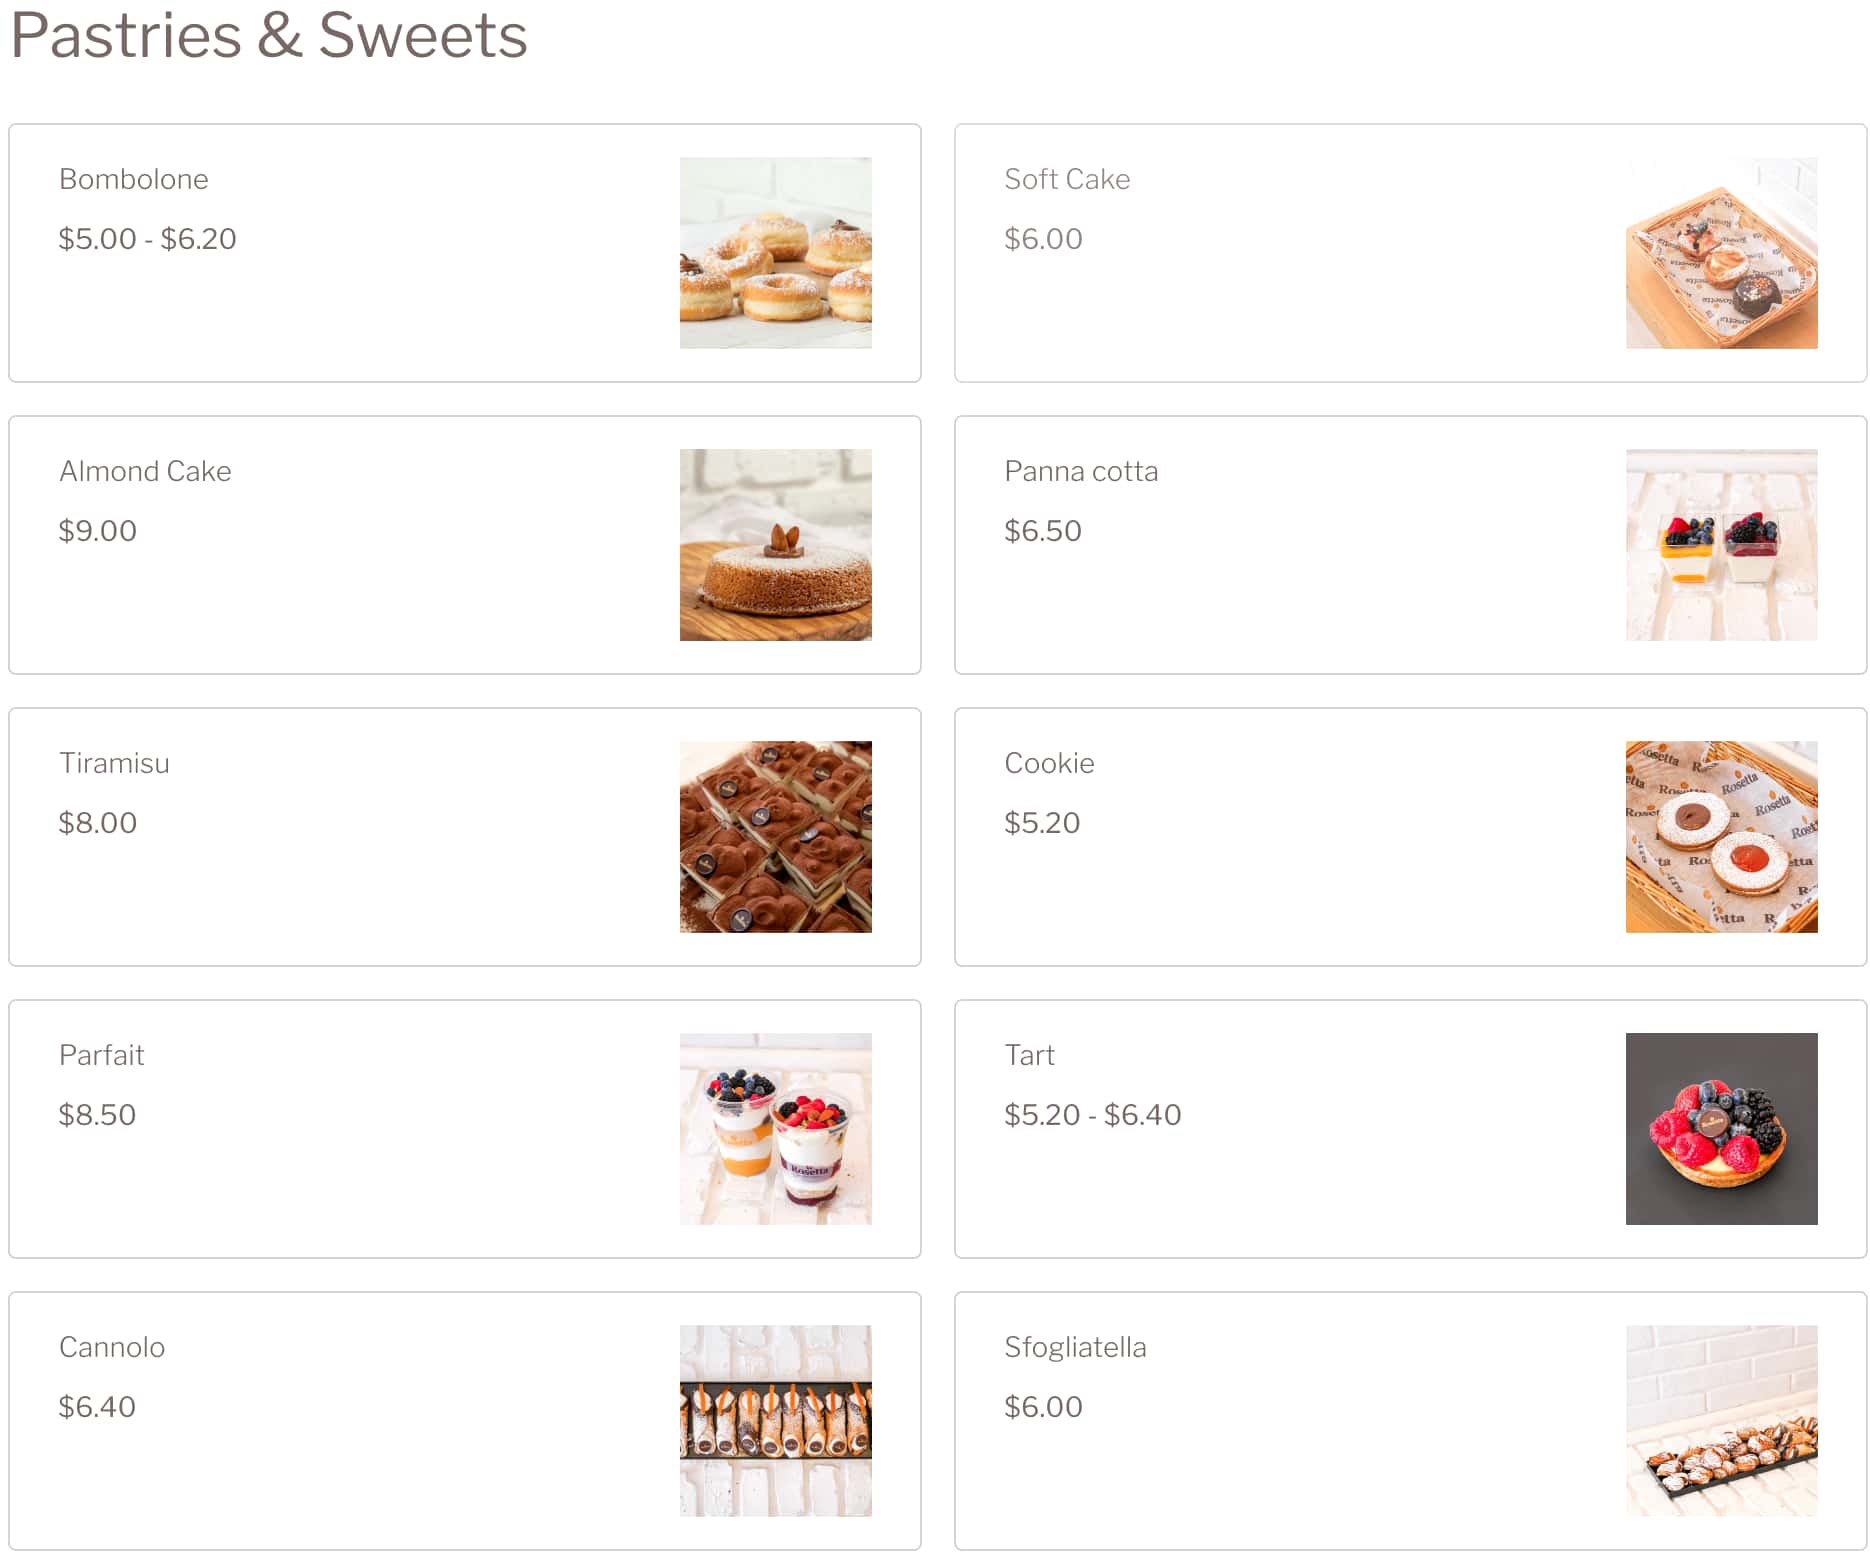 Rosetta Bakery Pastries and Sweets Menu